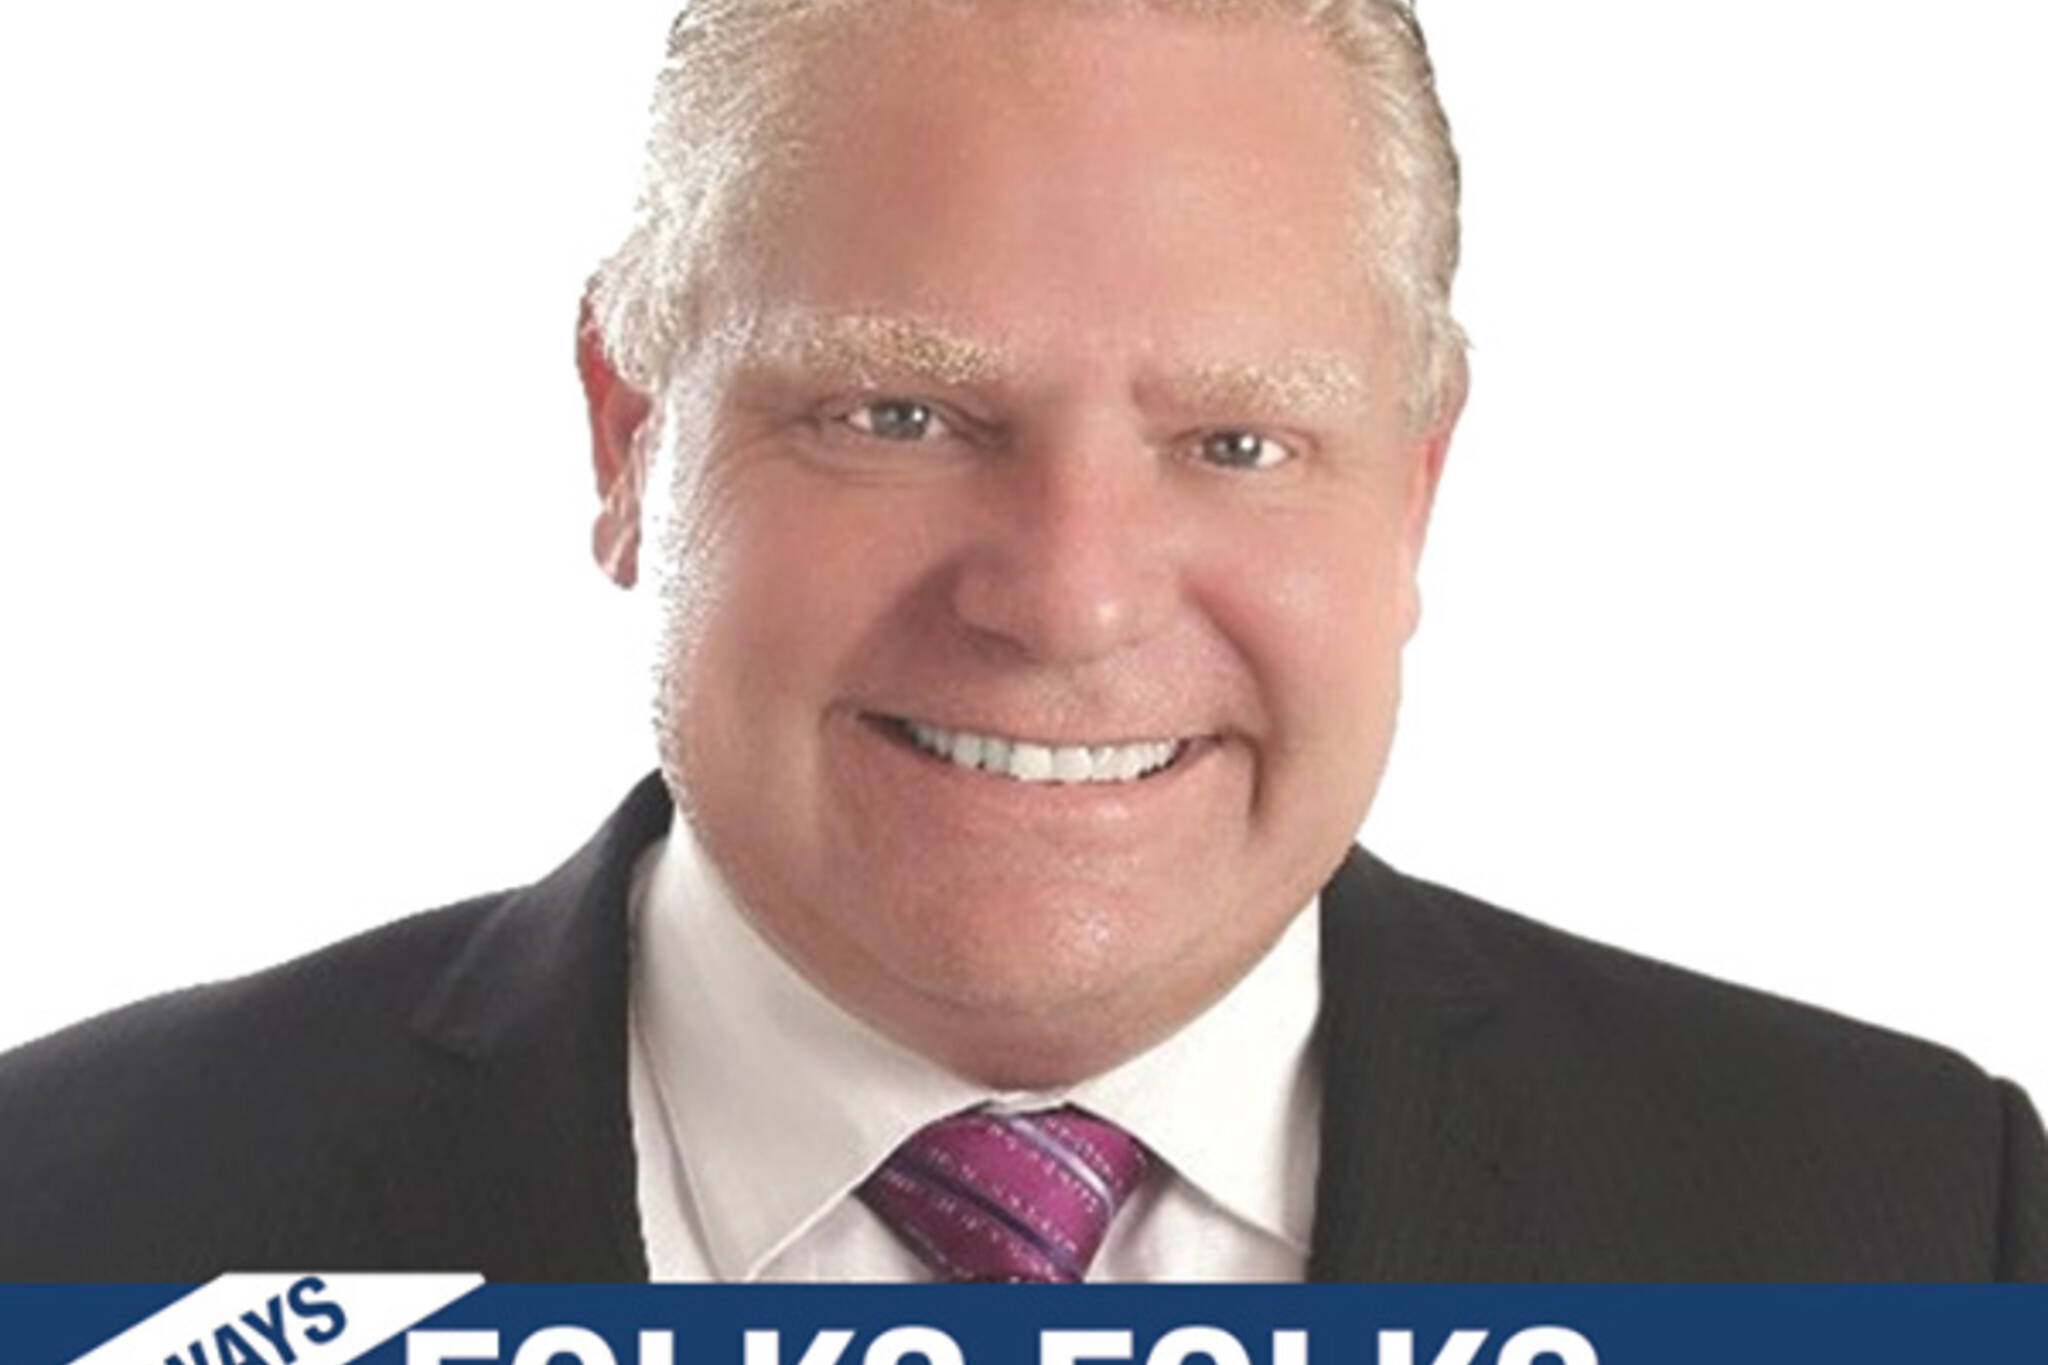 doug ford spoof campaign